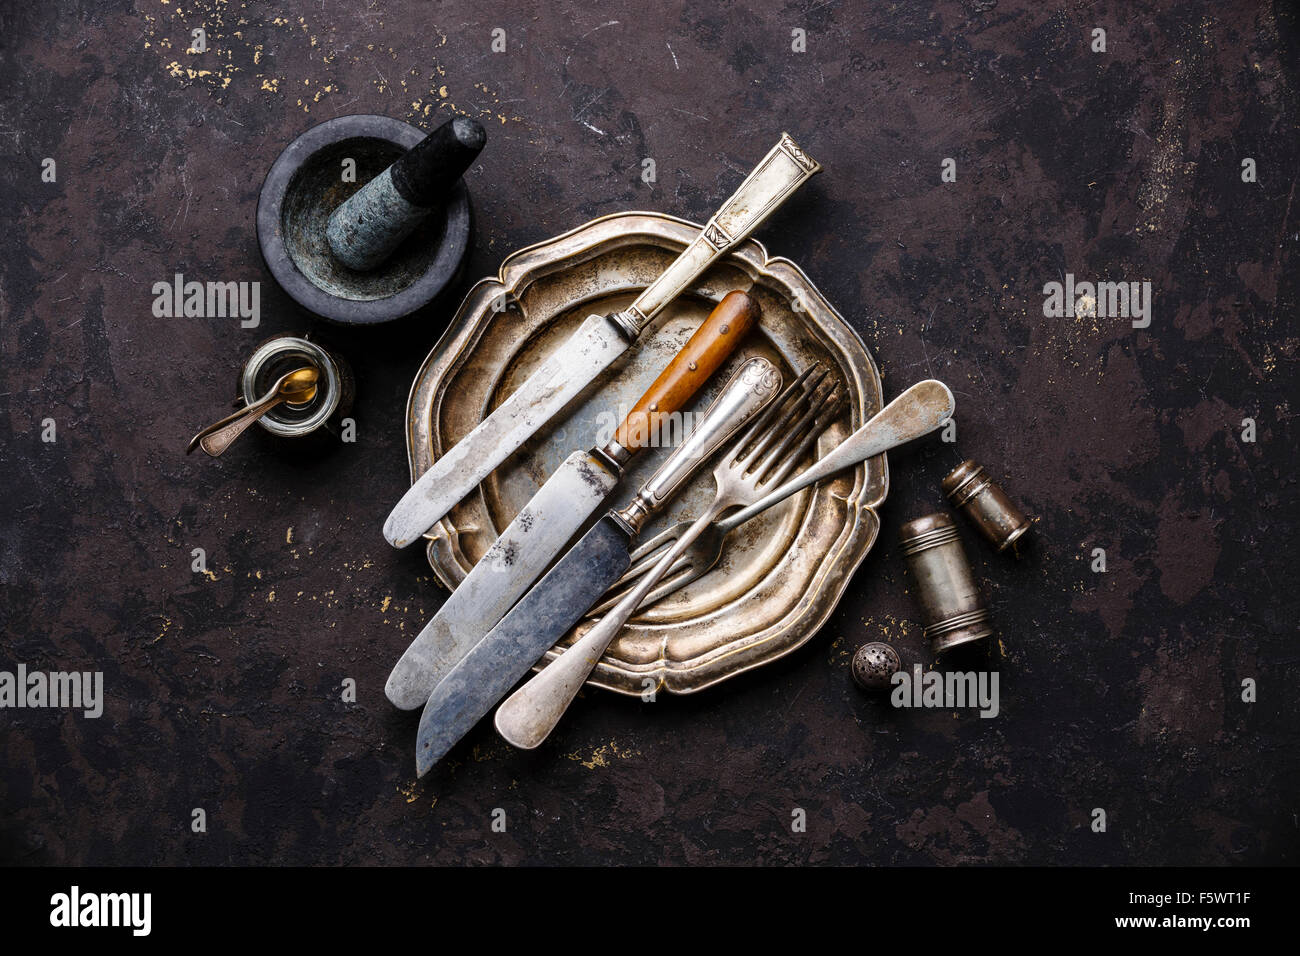 Vintage Kitchenware Table Knives and Forks on black background Stock Photo